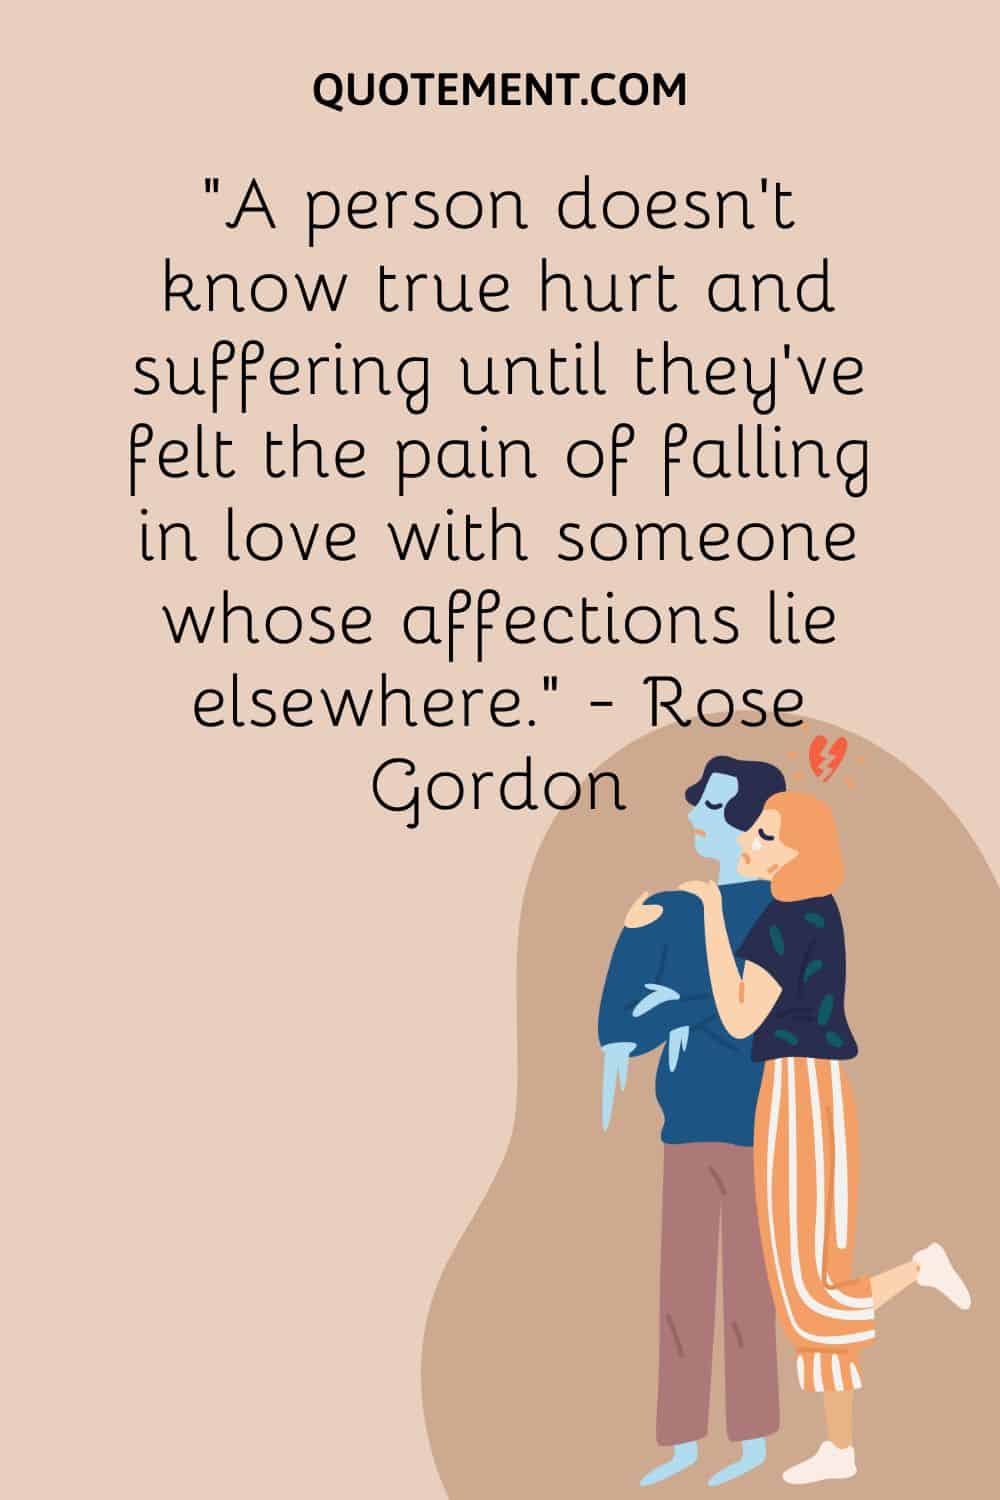 A person doesn’t know true hurt and suffering until they’ve felt the pain of falling in love with someone whose affections lie elsewhere